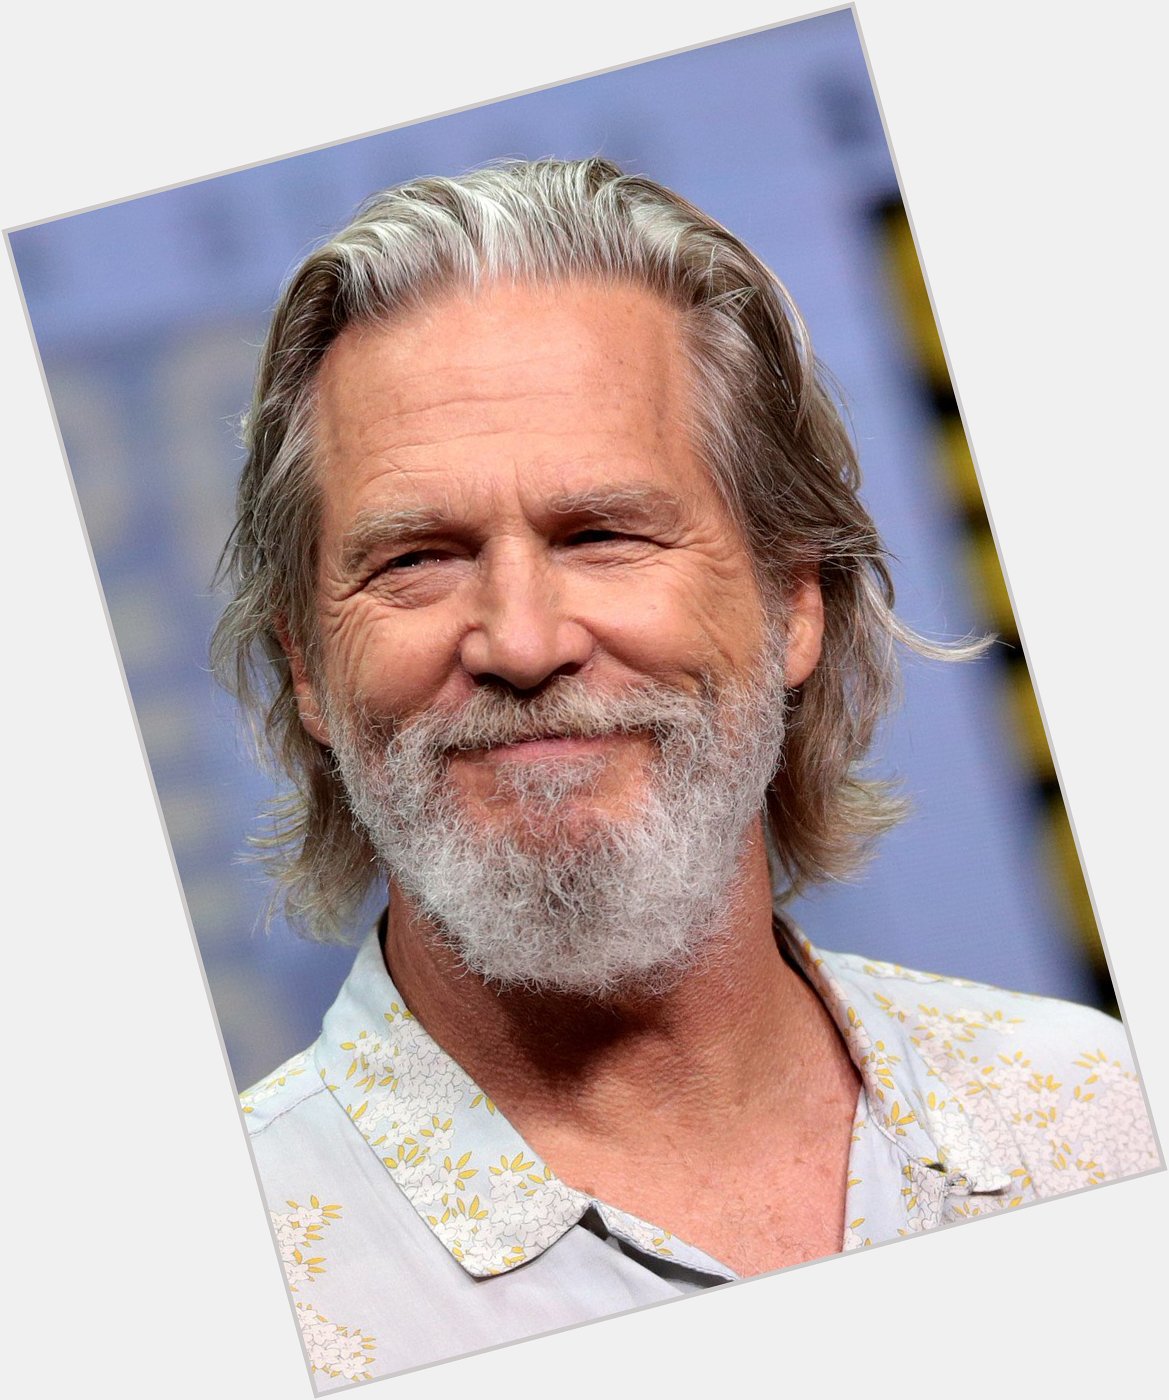 The incomparable Jeff Bridges turns 68 today - Happy Birthday sir!  